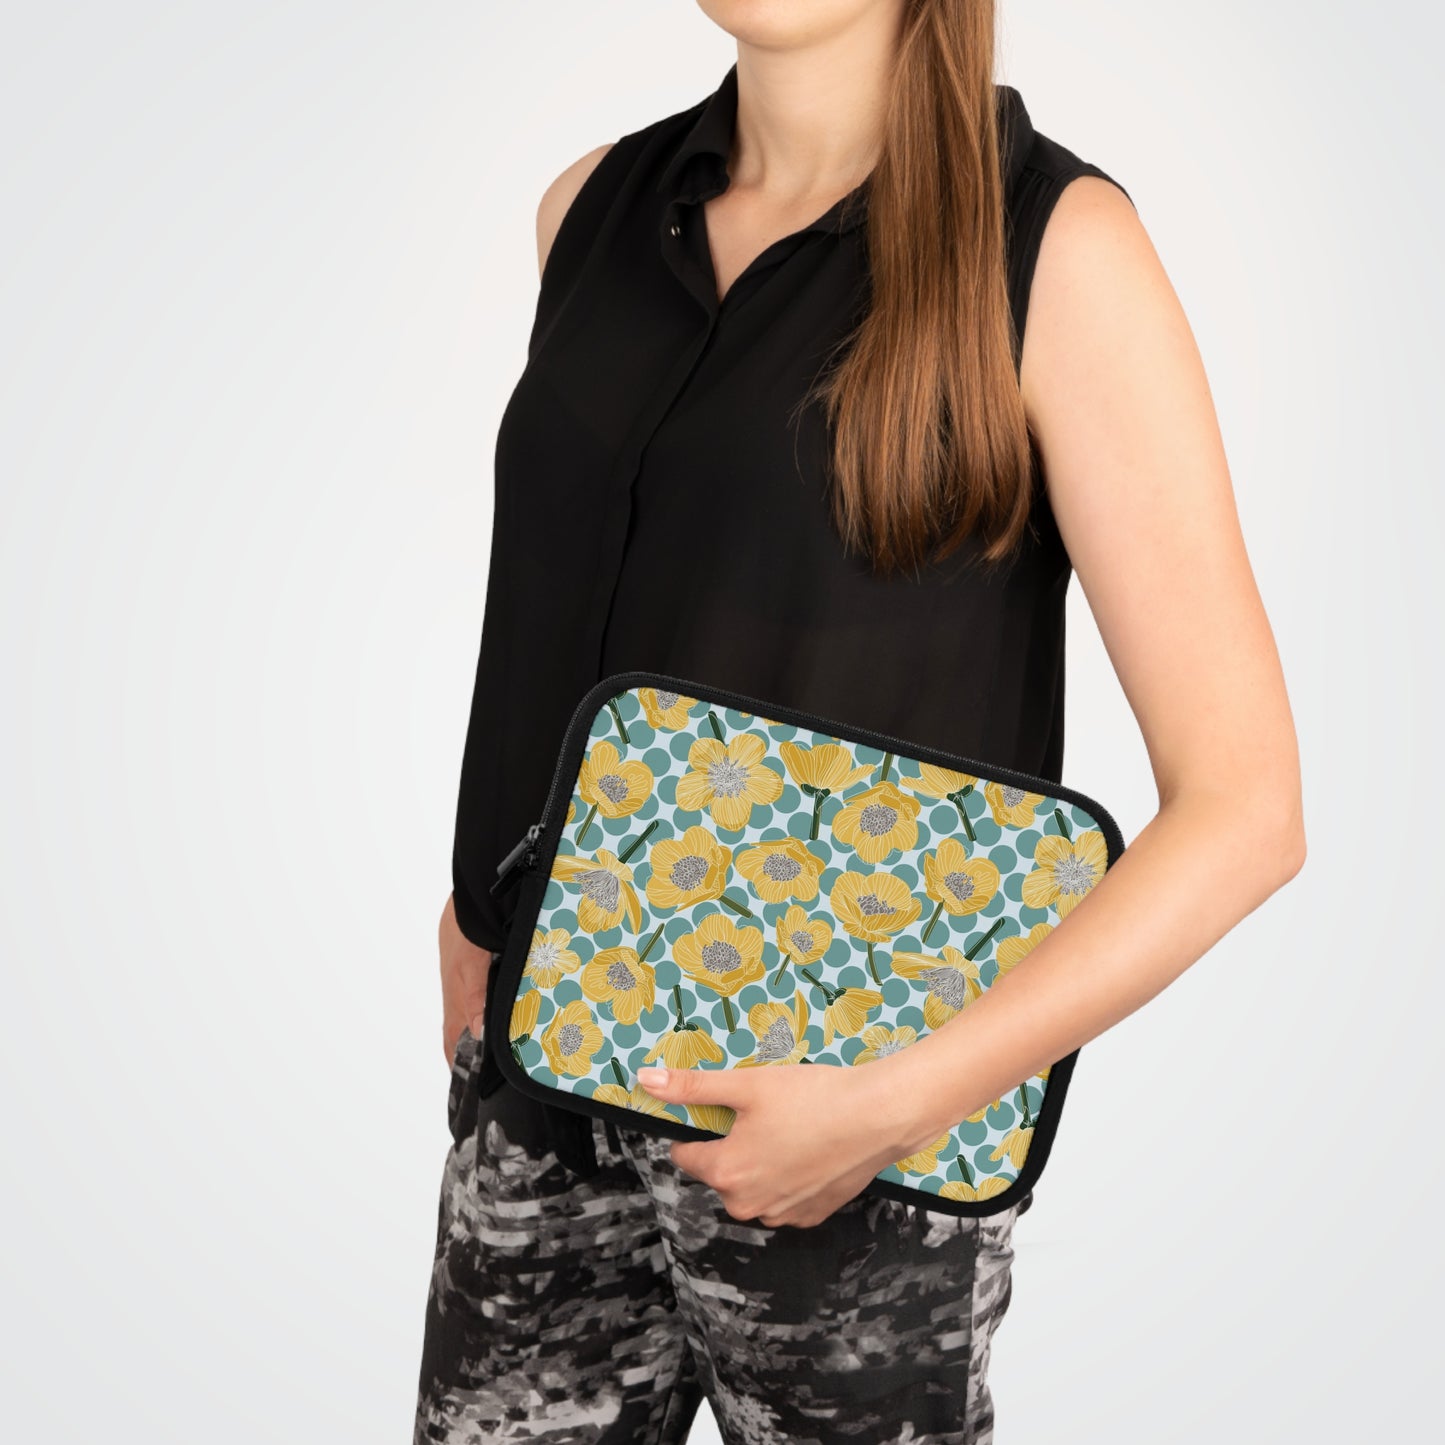 Buttercups and Polka Dots Laptop Sleeve